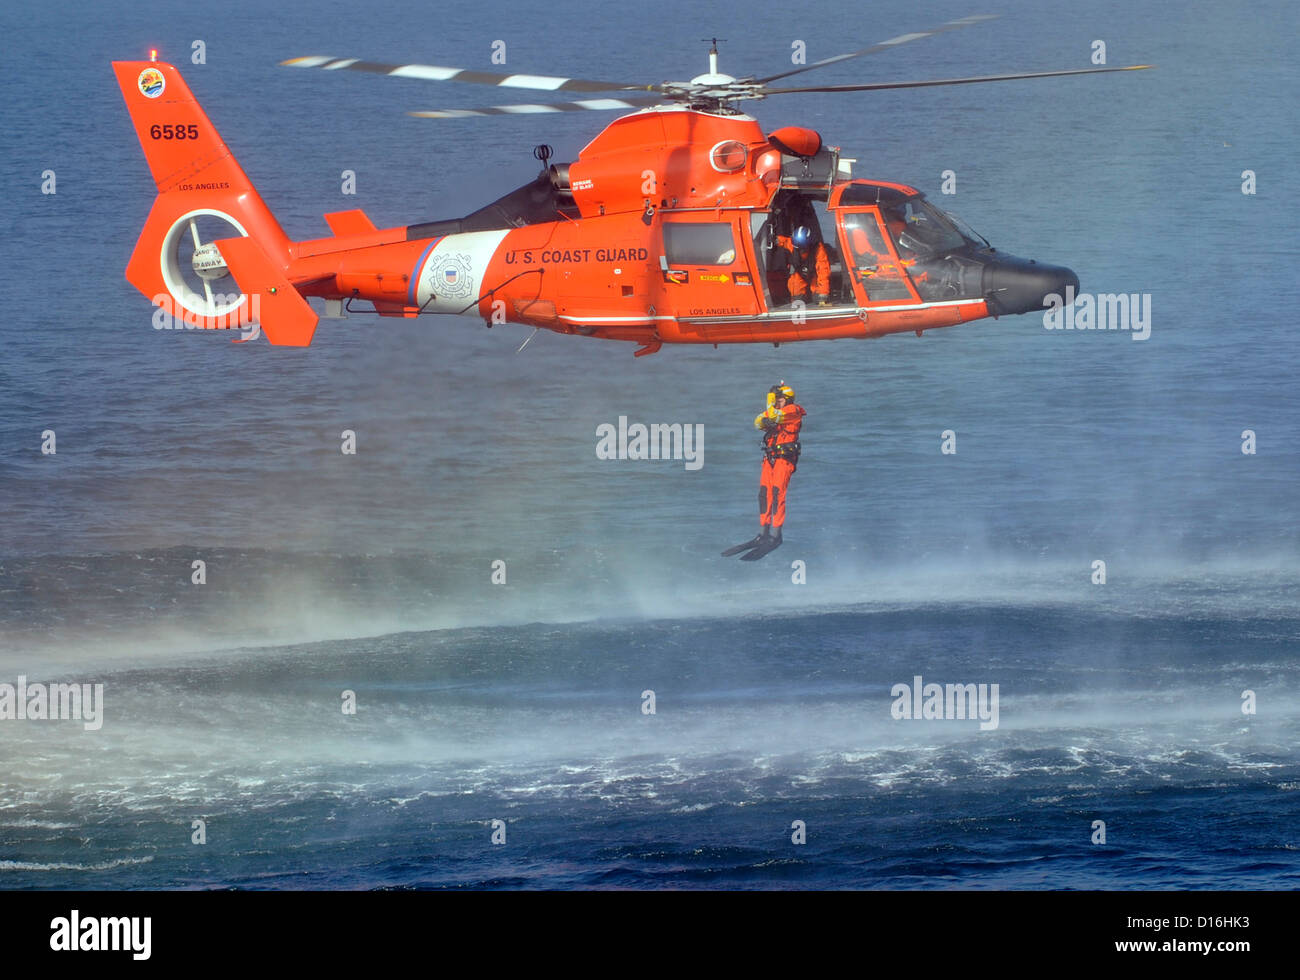 HERMOSA BEACH, Calif. - Petty Officer 1st Class Ty Aweau, an Aviation Survival Technician, conducts rescue swimmer training with an aircrew from Coast Guard Air Station Los Angeles off the Hermosa Beach Pier, Nov. 31, 2012. Flight crews must constantly tr Stock Photo